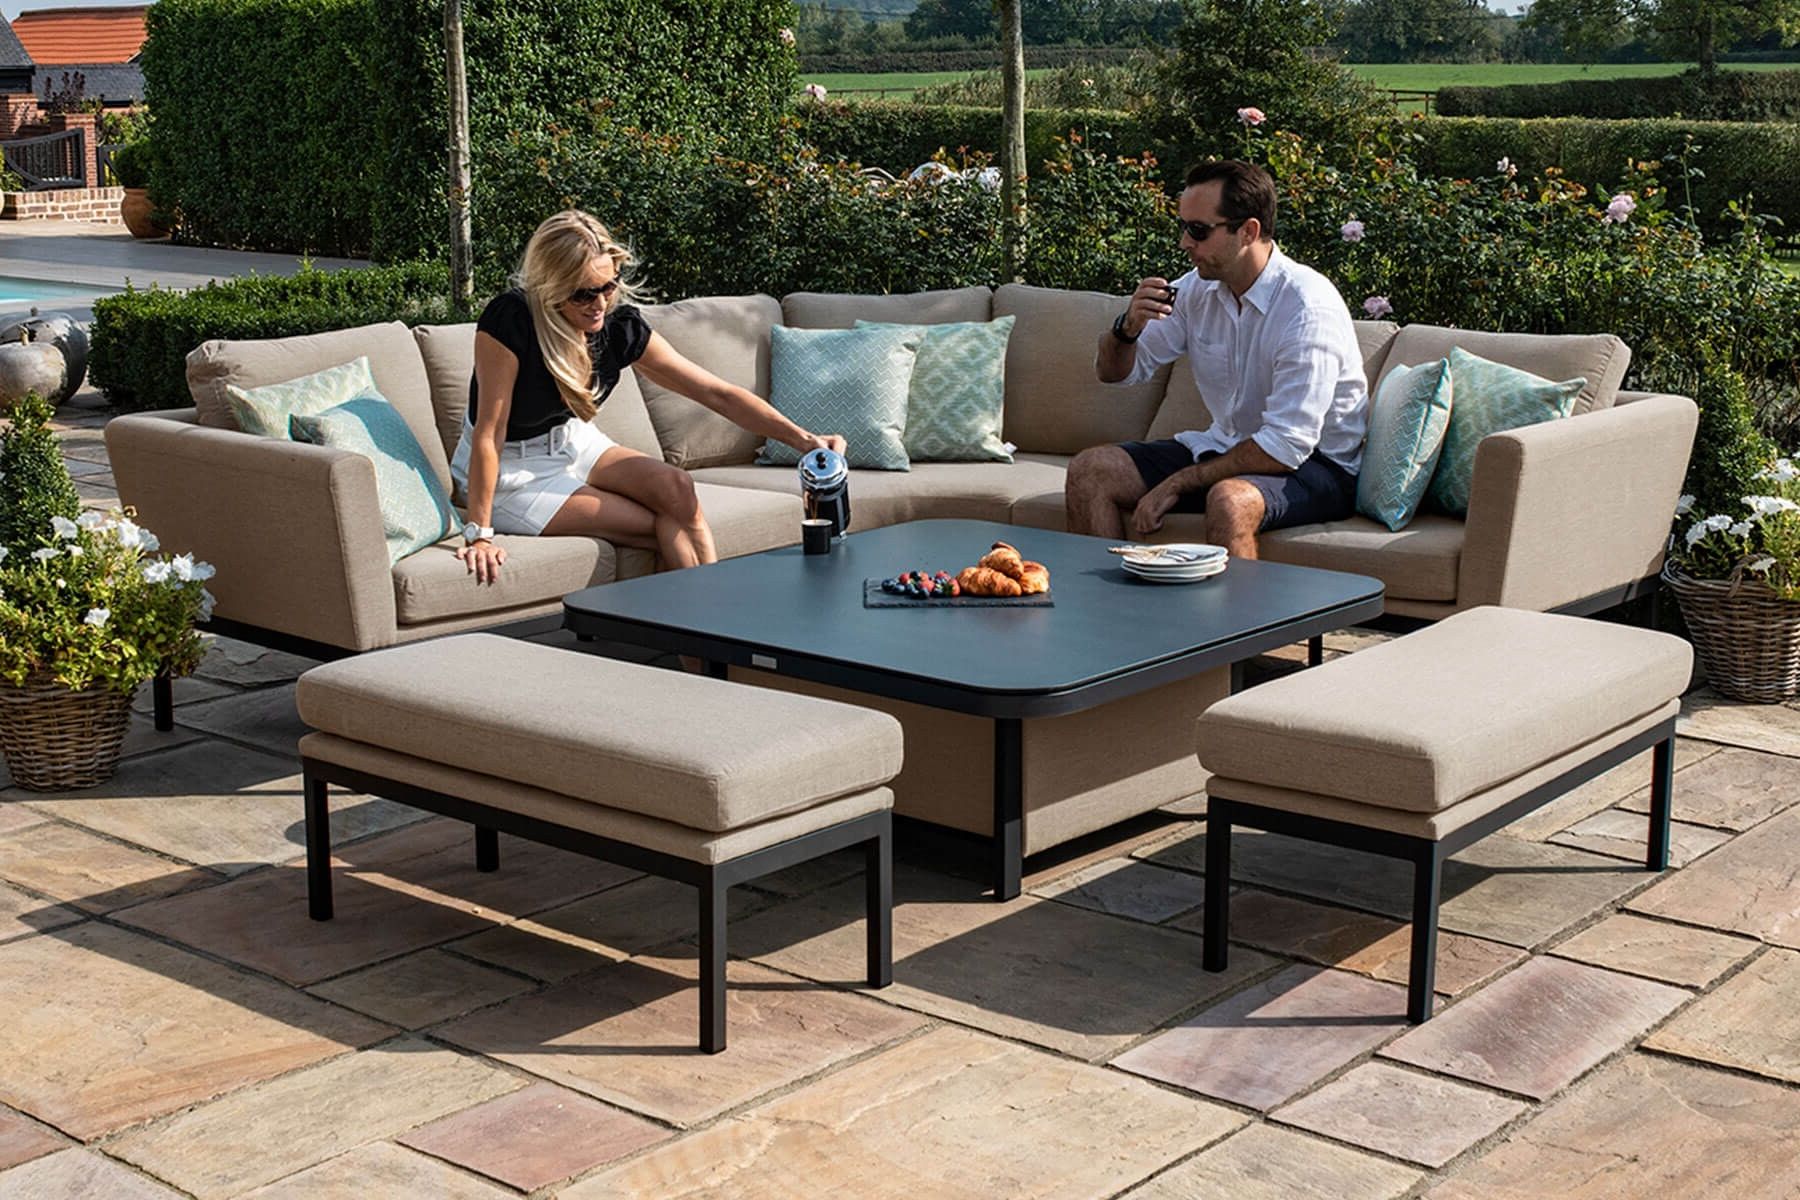 Recent Maze Outdoor Fabric Pulse Deluxe Square Corner Dining Set – Rising Table Within Deluxe Square Patio Dining Sets (View 11 of 15)